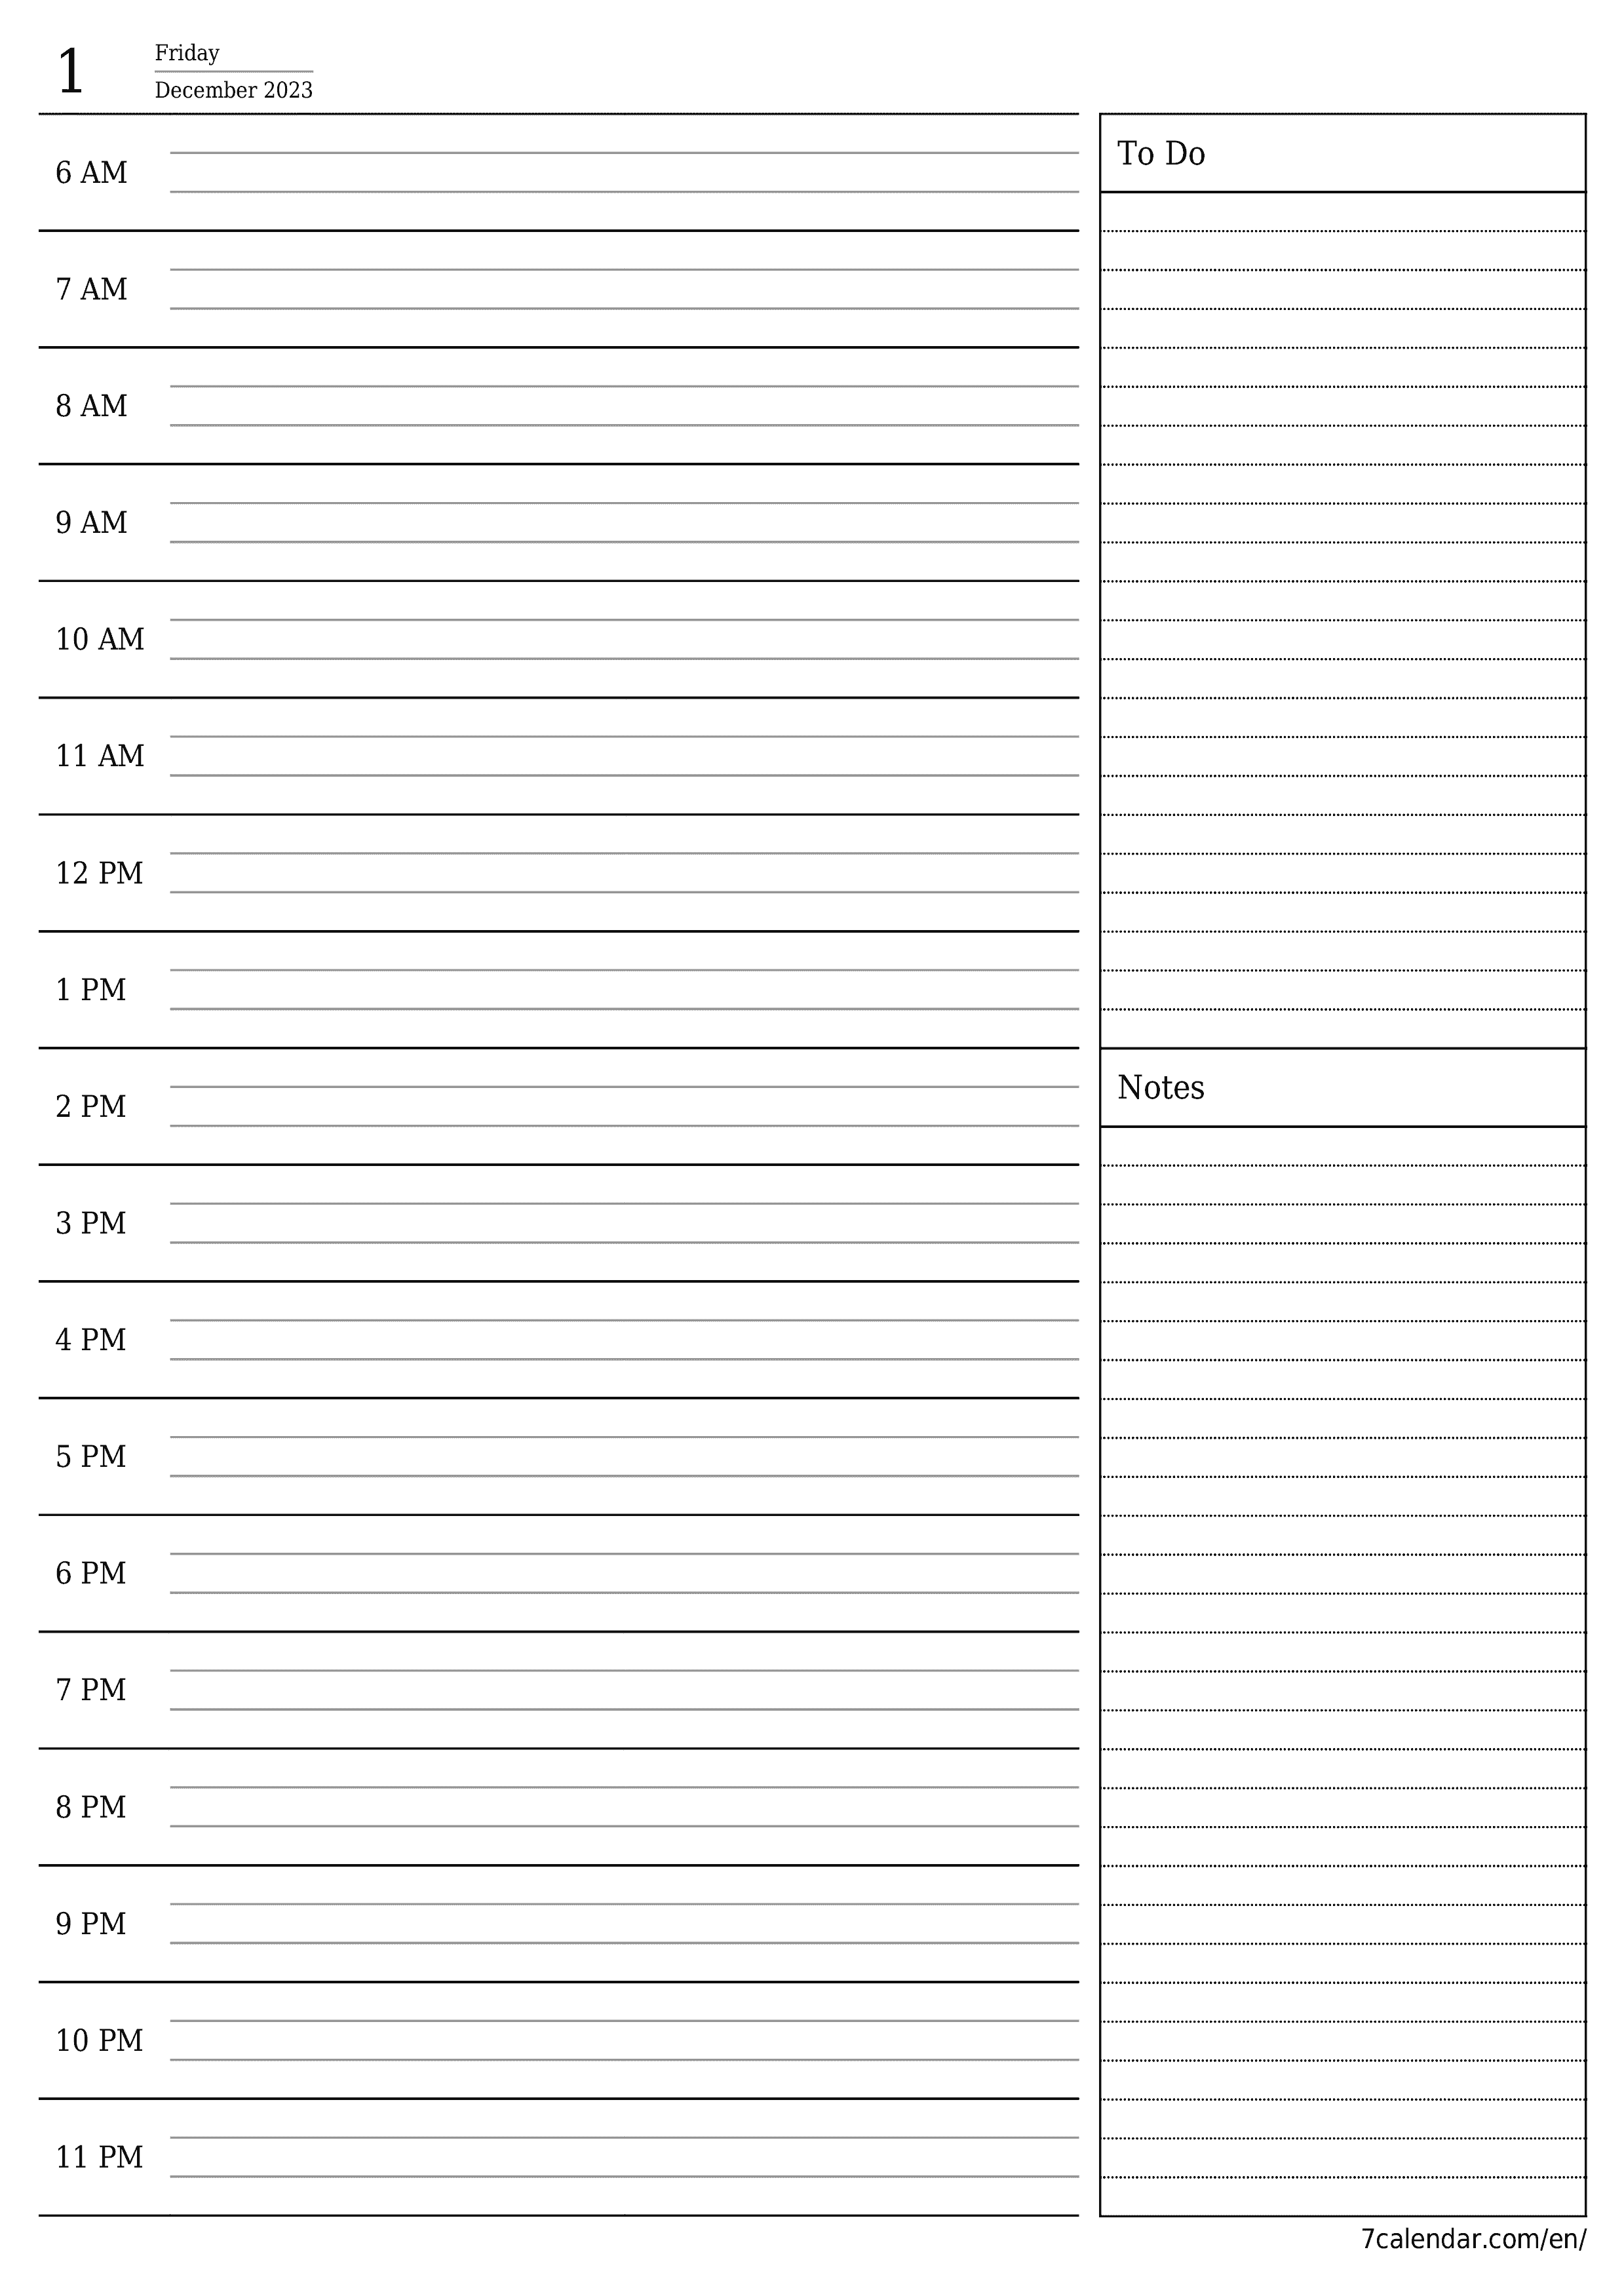 Blank daily printable calendar and planner for day December 2023 with notes, save and print to PDF PNG English - 7calendar.com